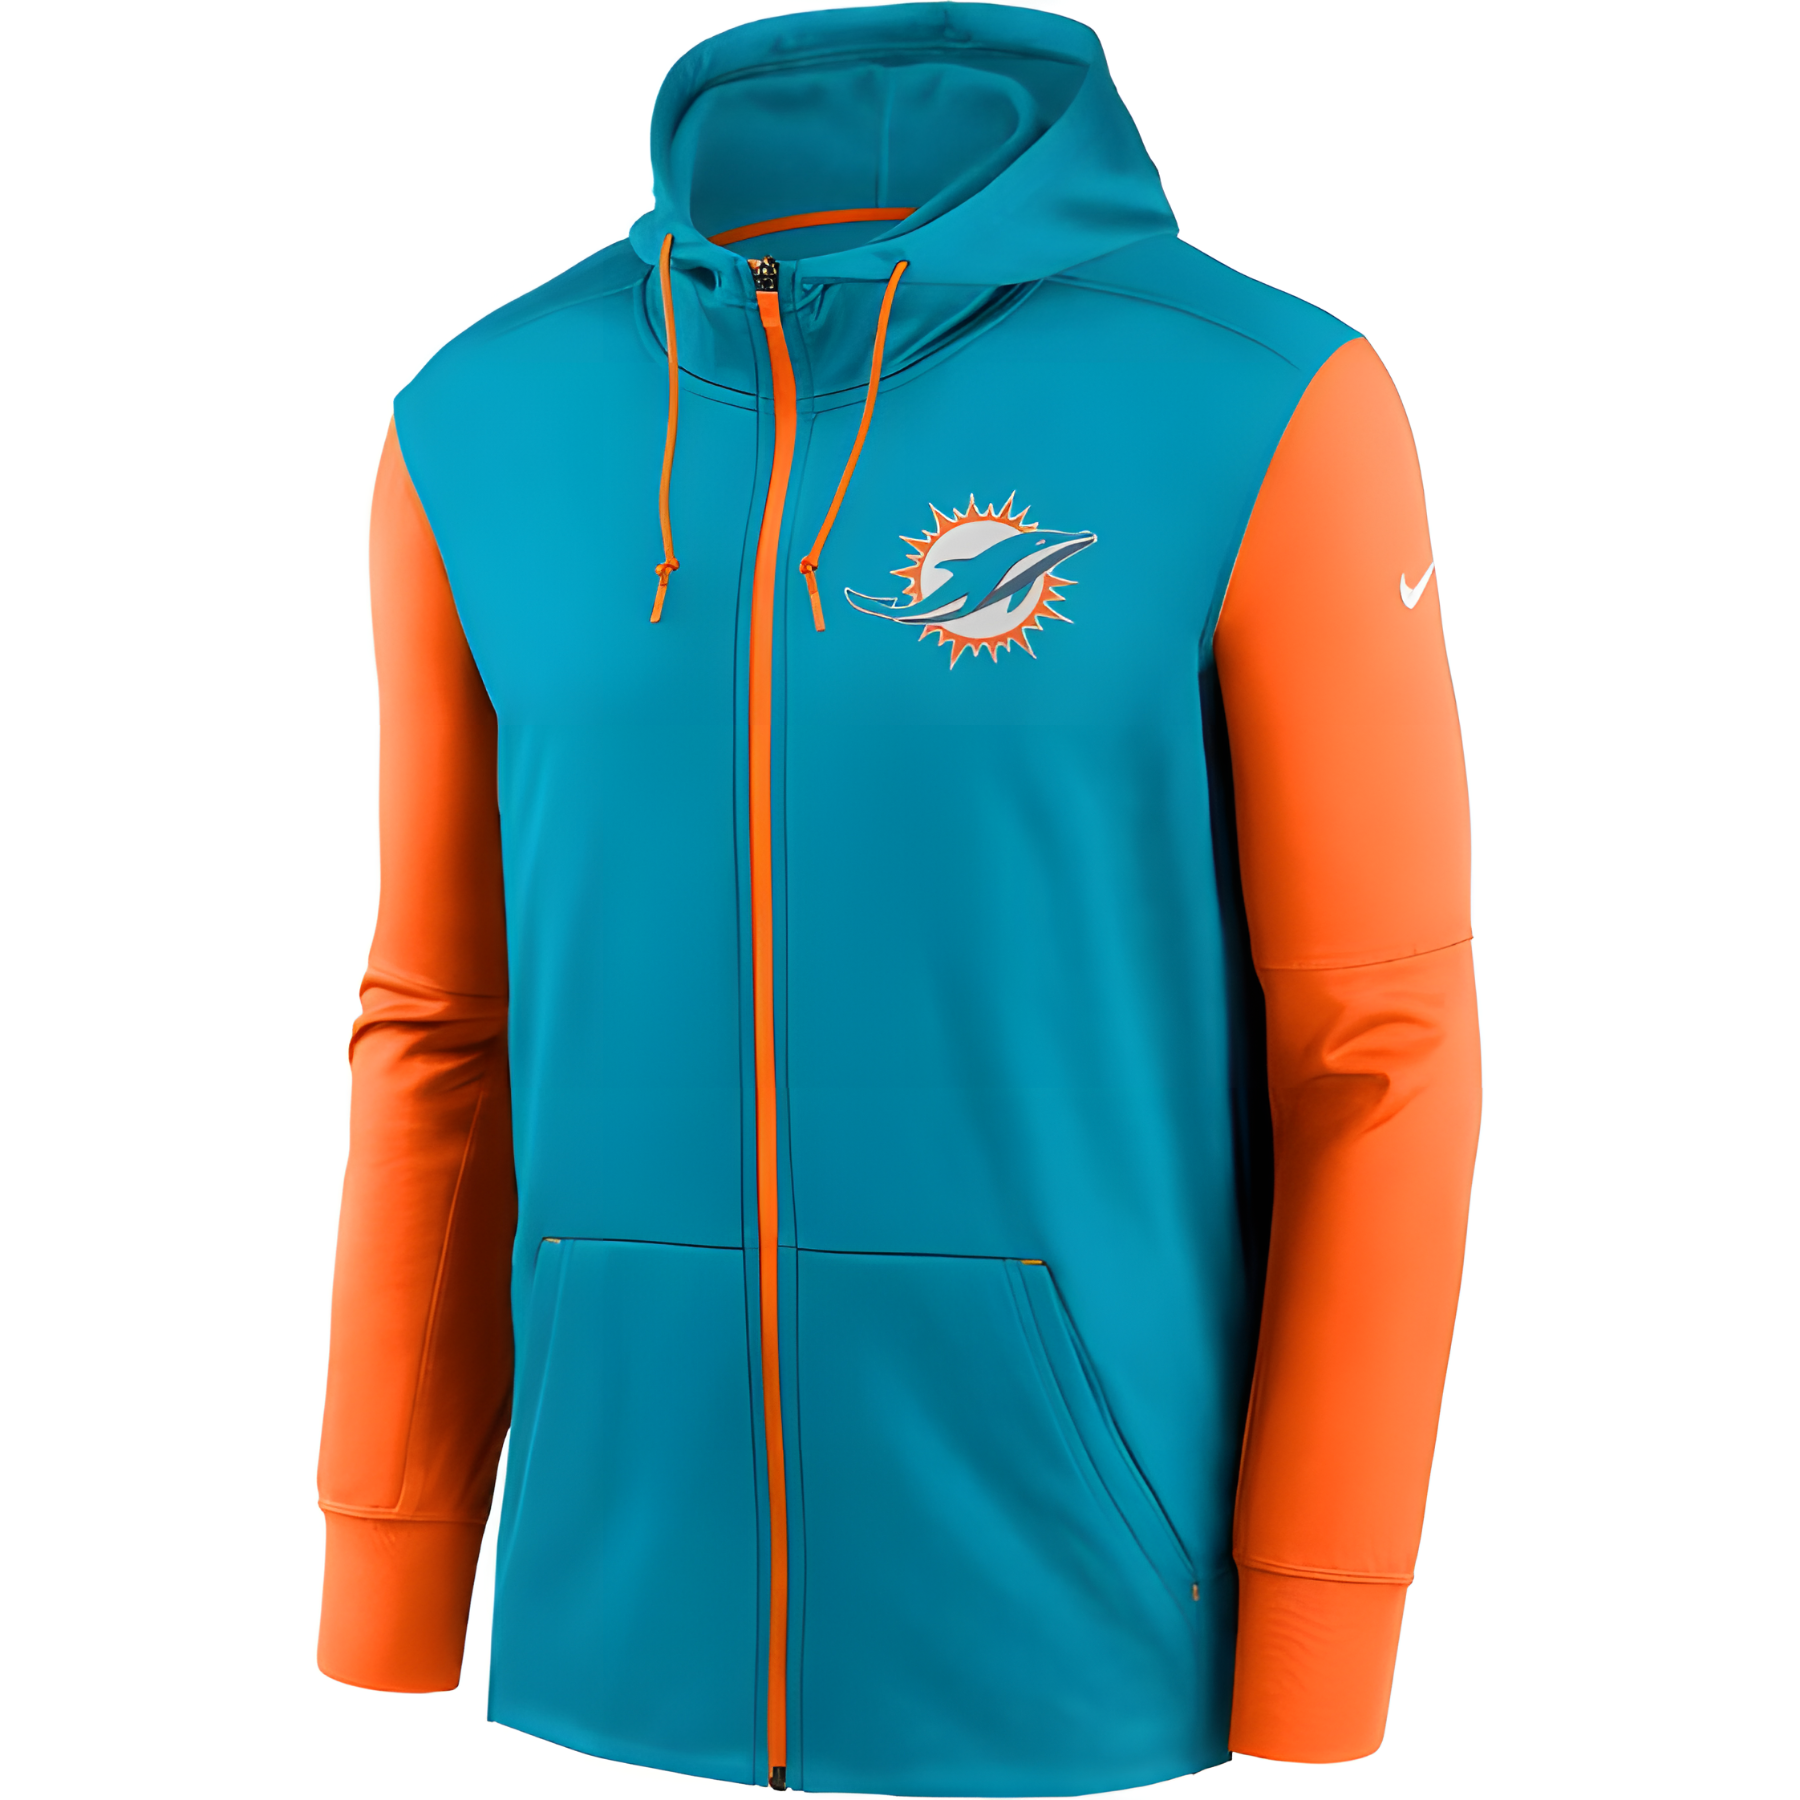 Chamarra Nike Therma Dolphins